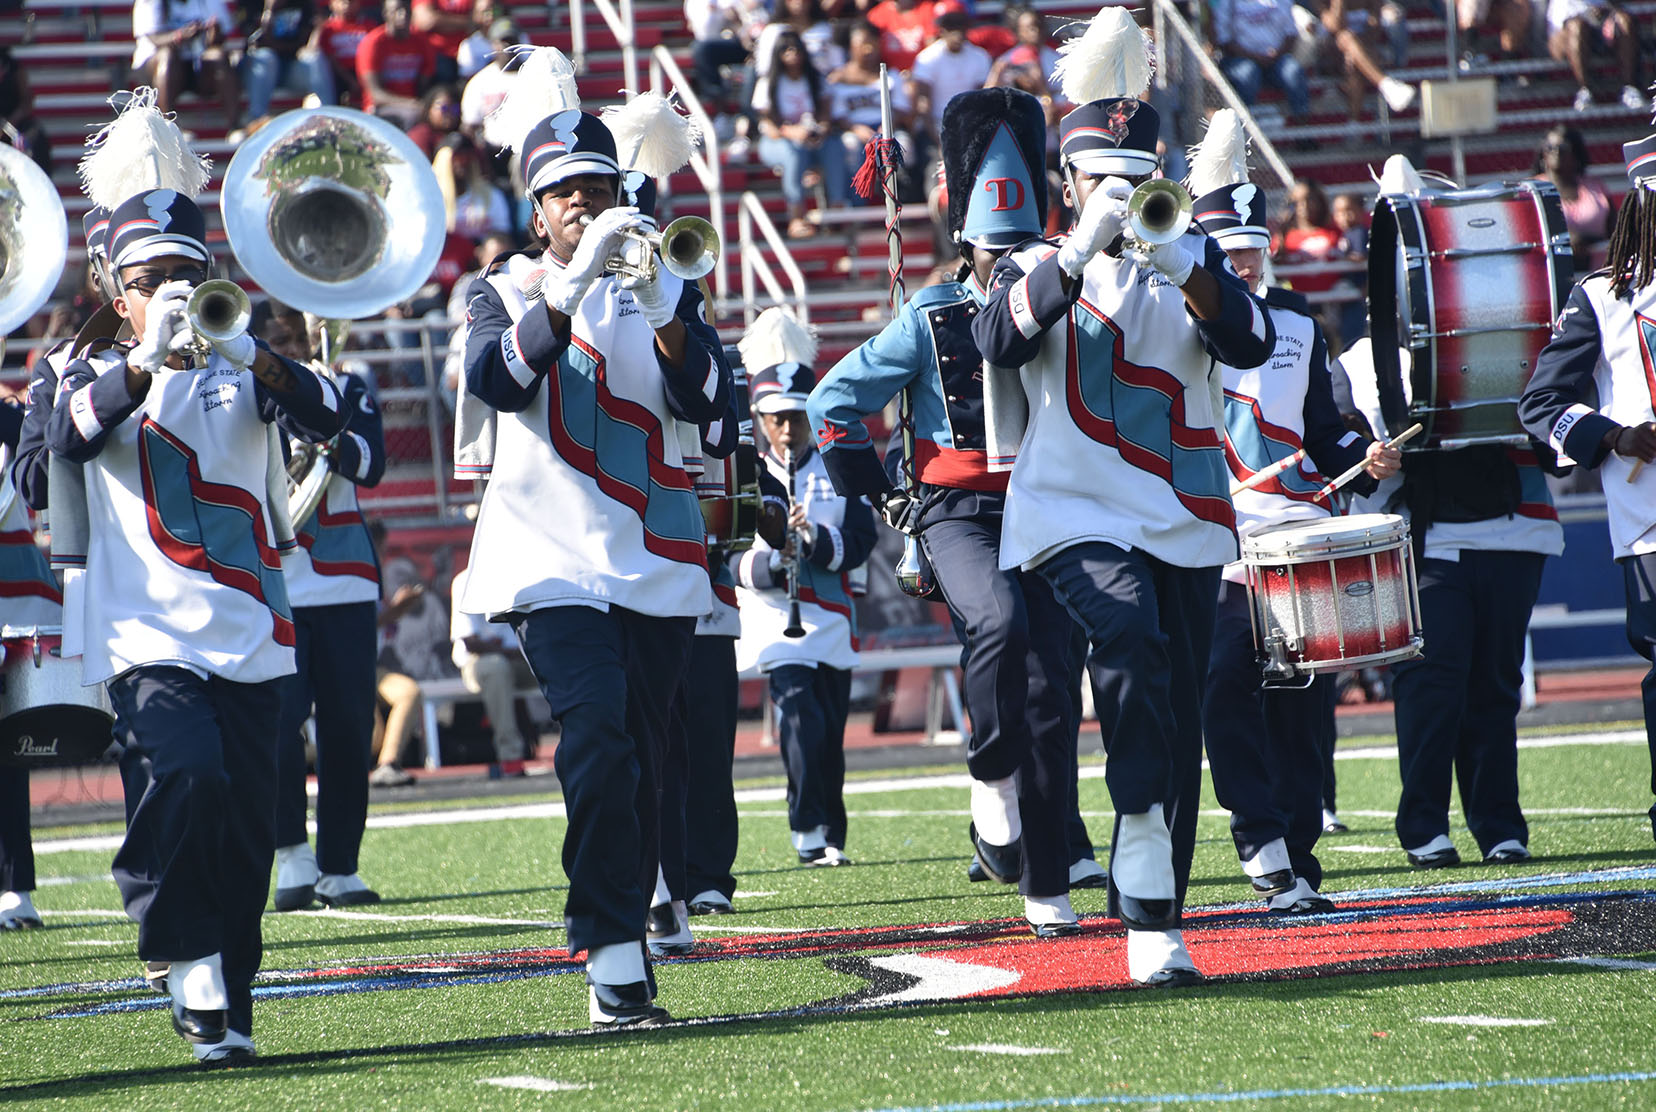 Former Approaching Storm members Sidney Sessoms and Vincent Adkins have been named as the new band director and assistant band director, respectively,  for Del States' premier marching band.